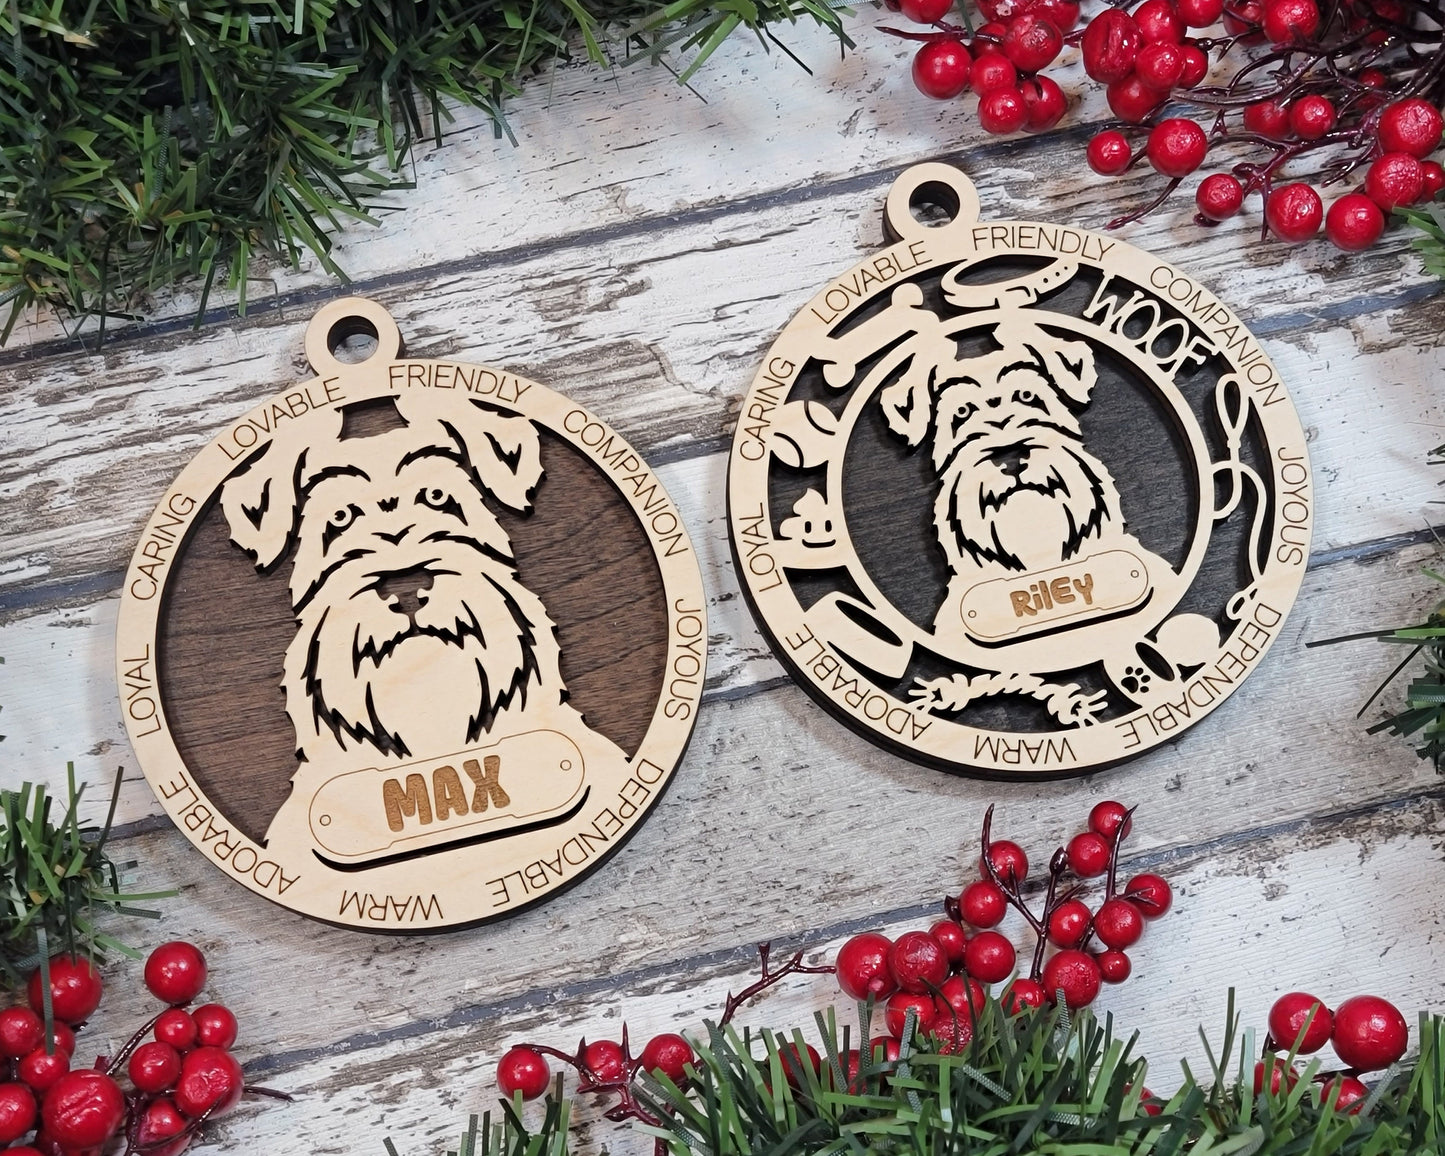 Schnauzer - Adorable Dog Ornaments - 2 Ornaments included - SVG, PDF, AI File Download - Sized for Glowforge